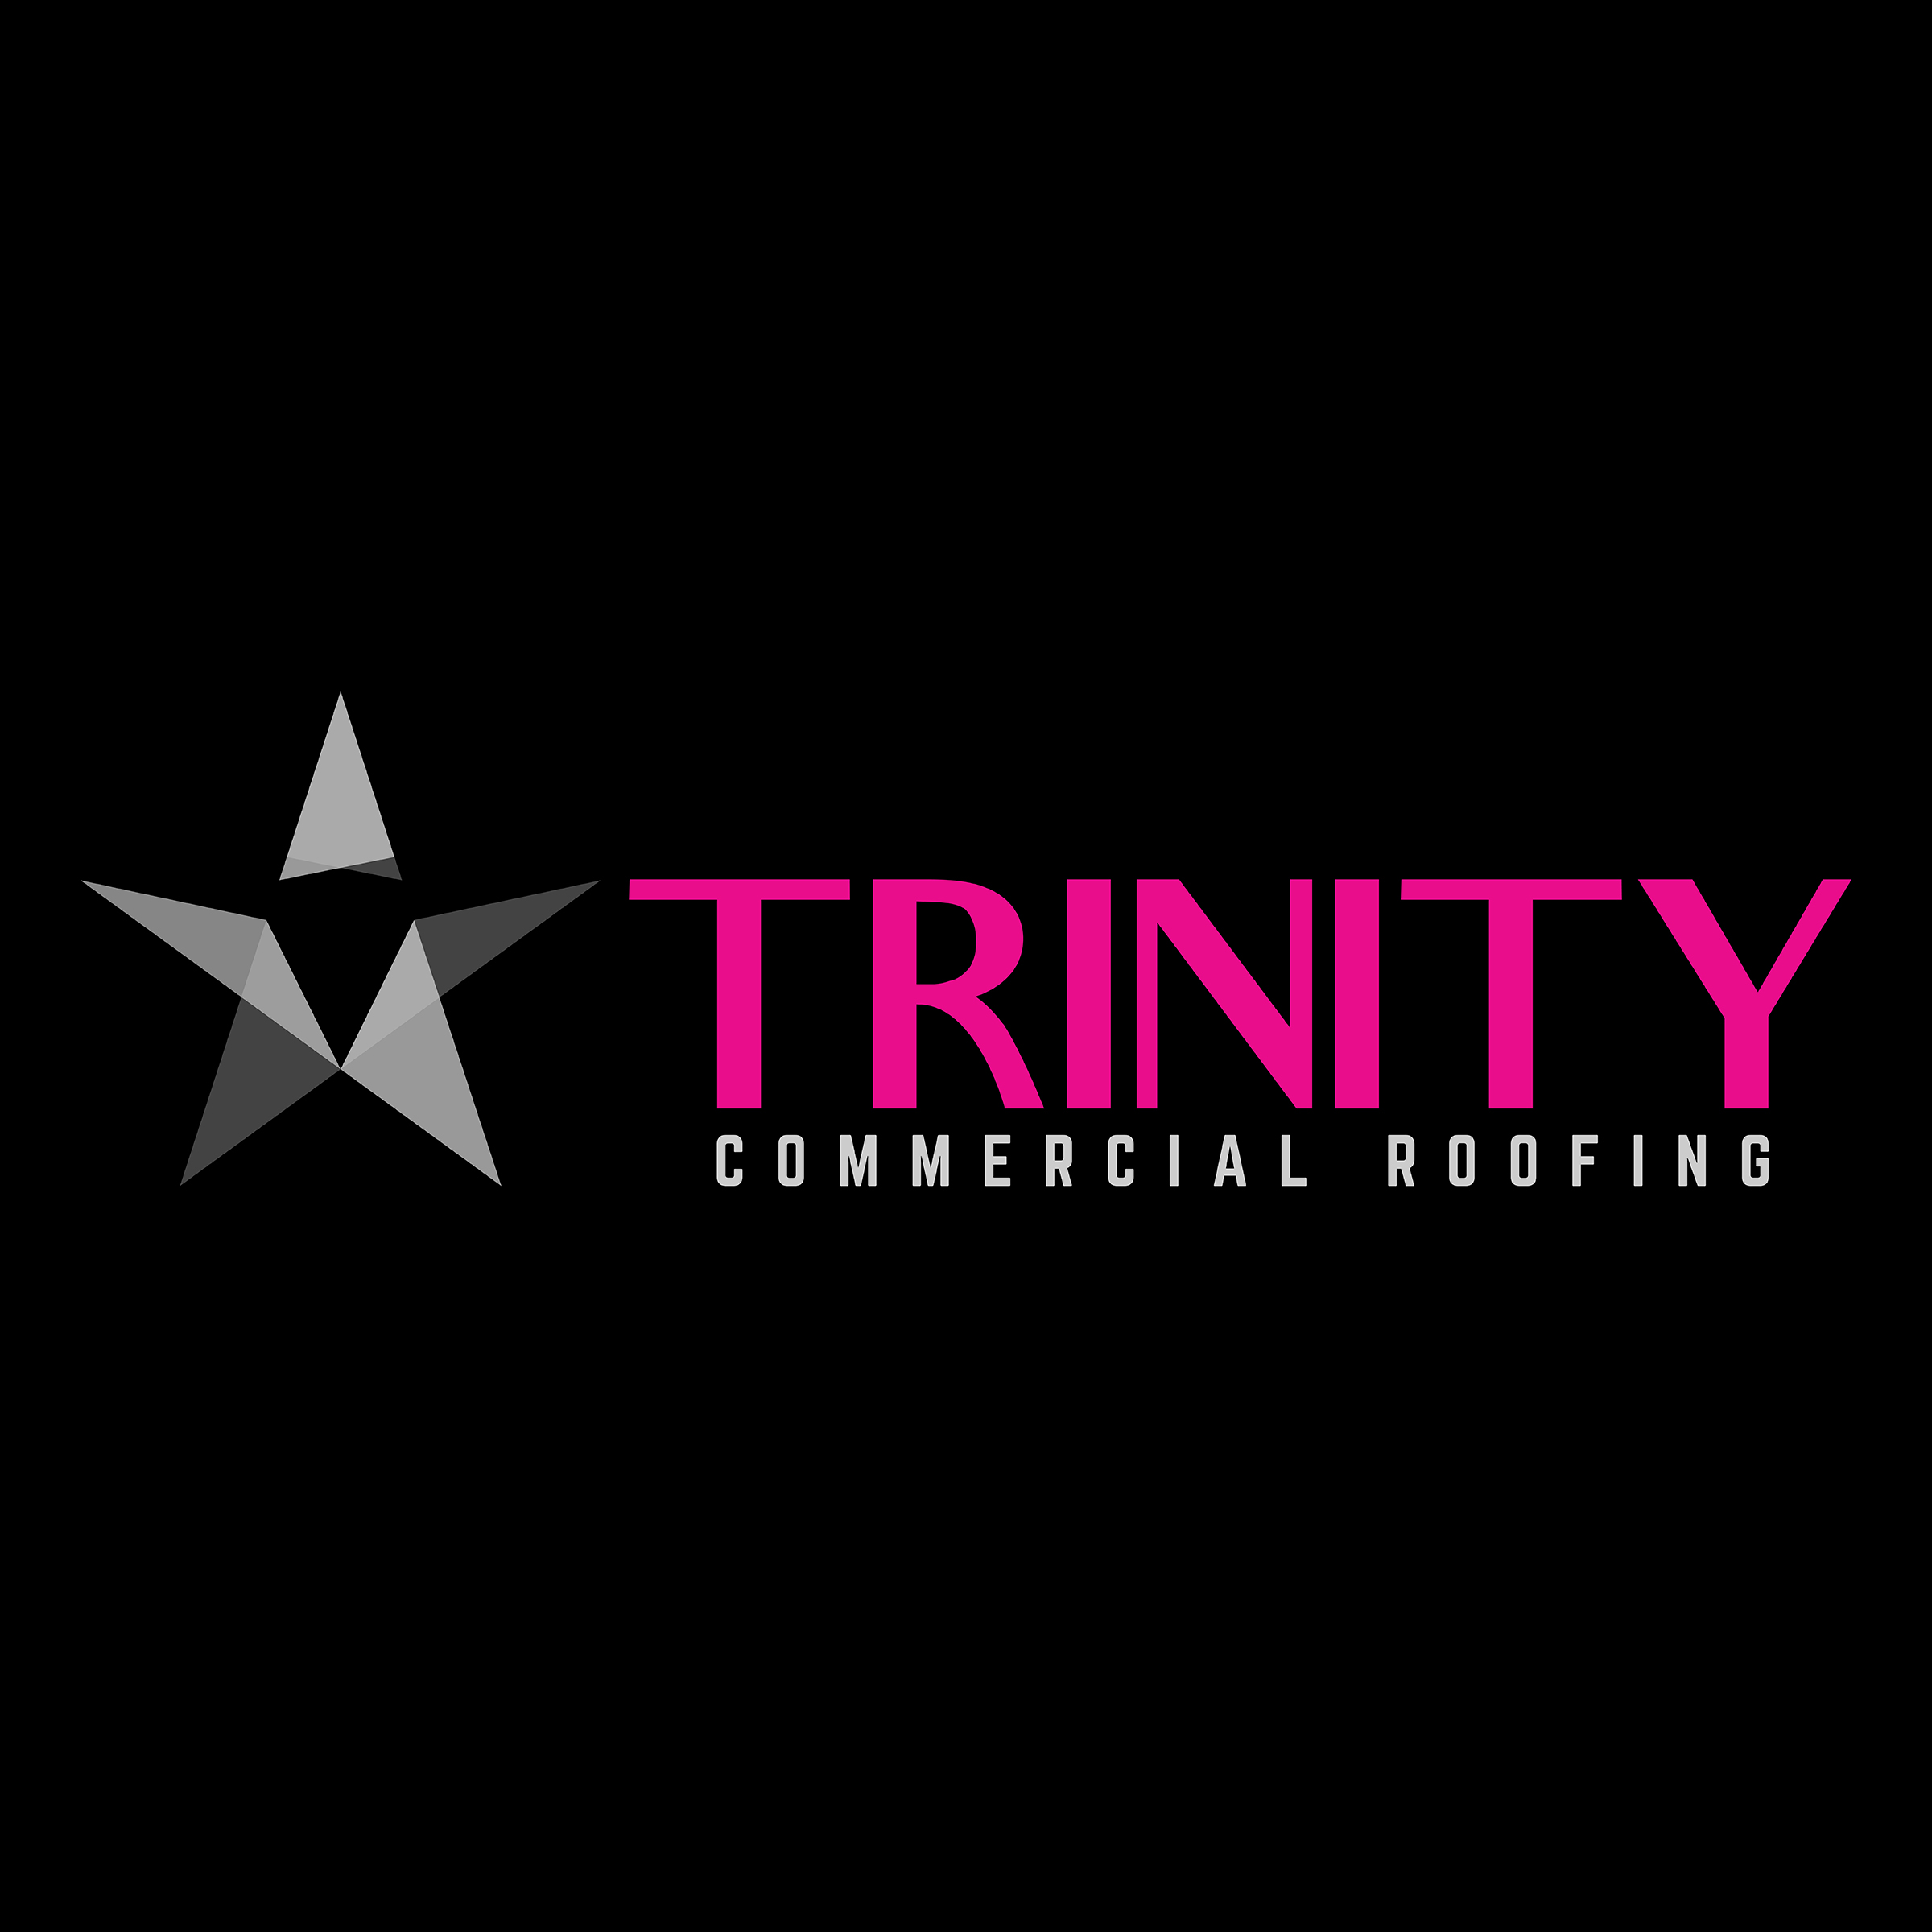 Trinity Commercial Roofing Logo